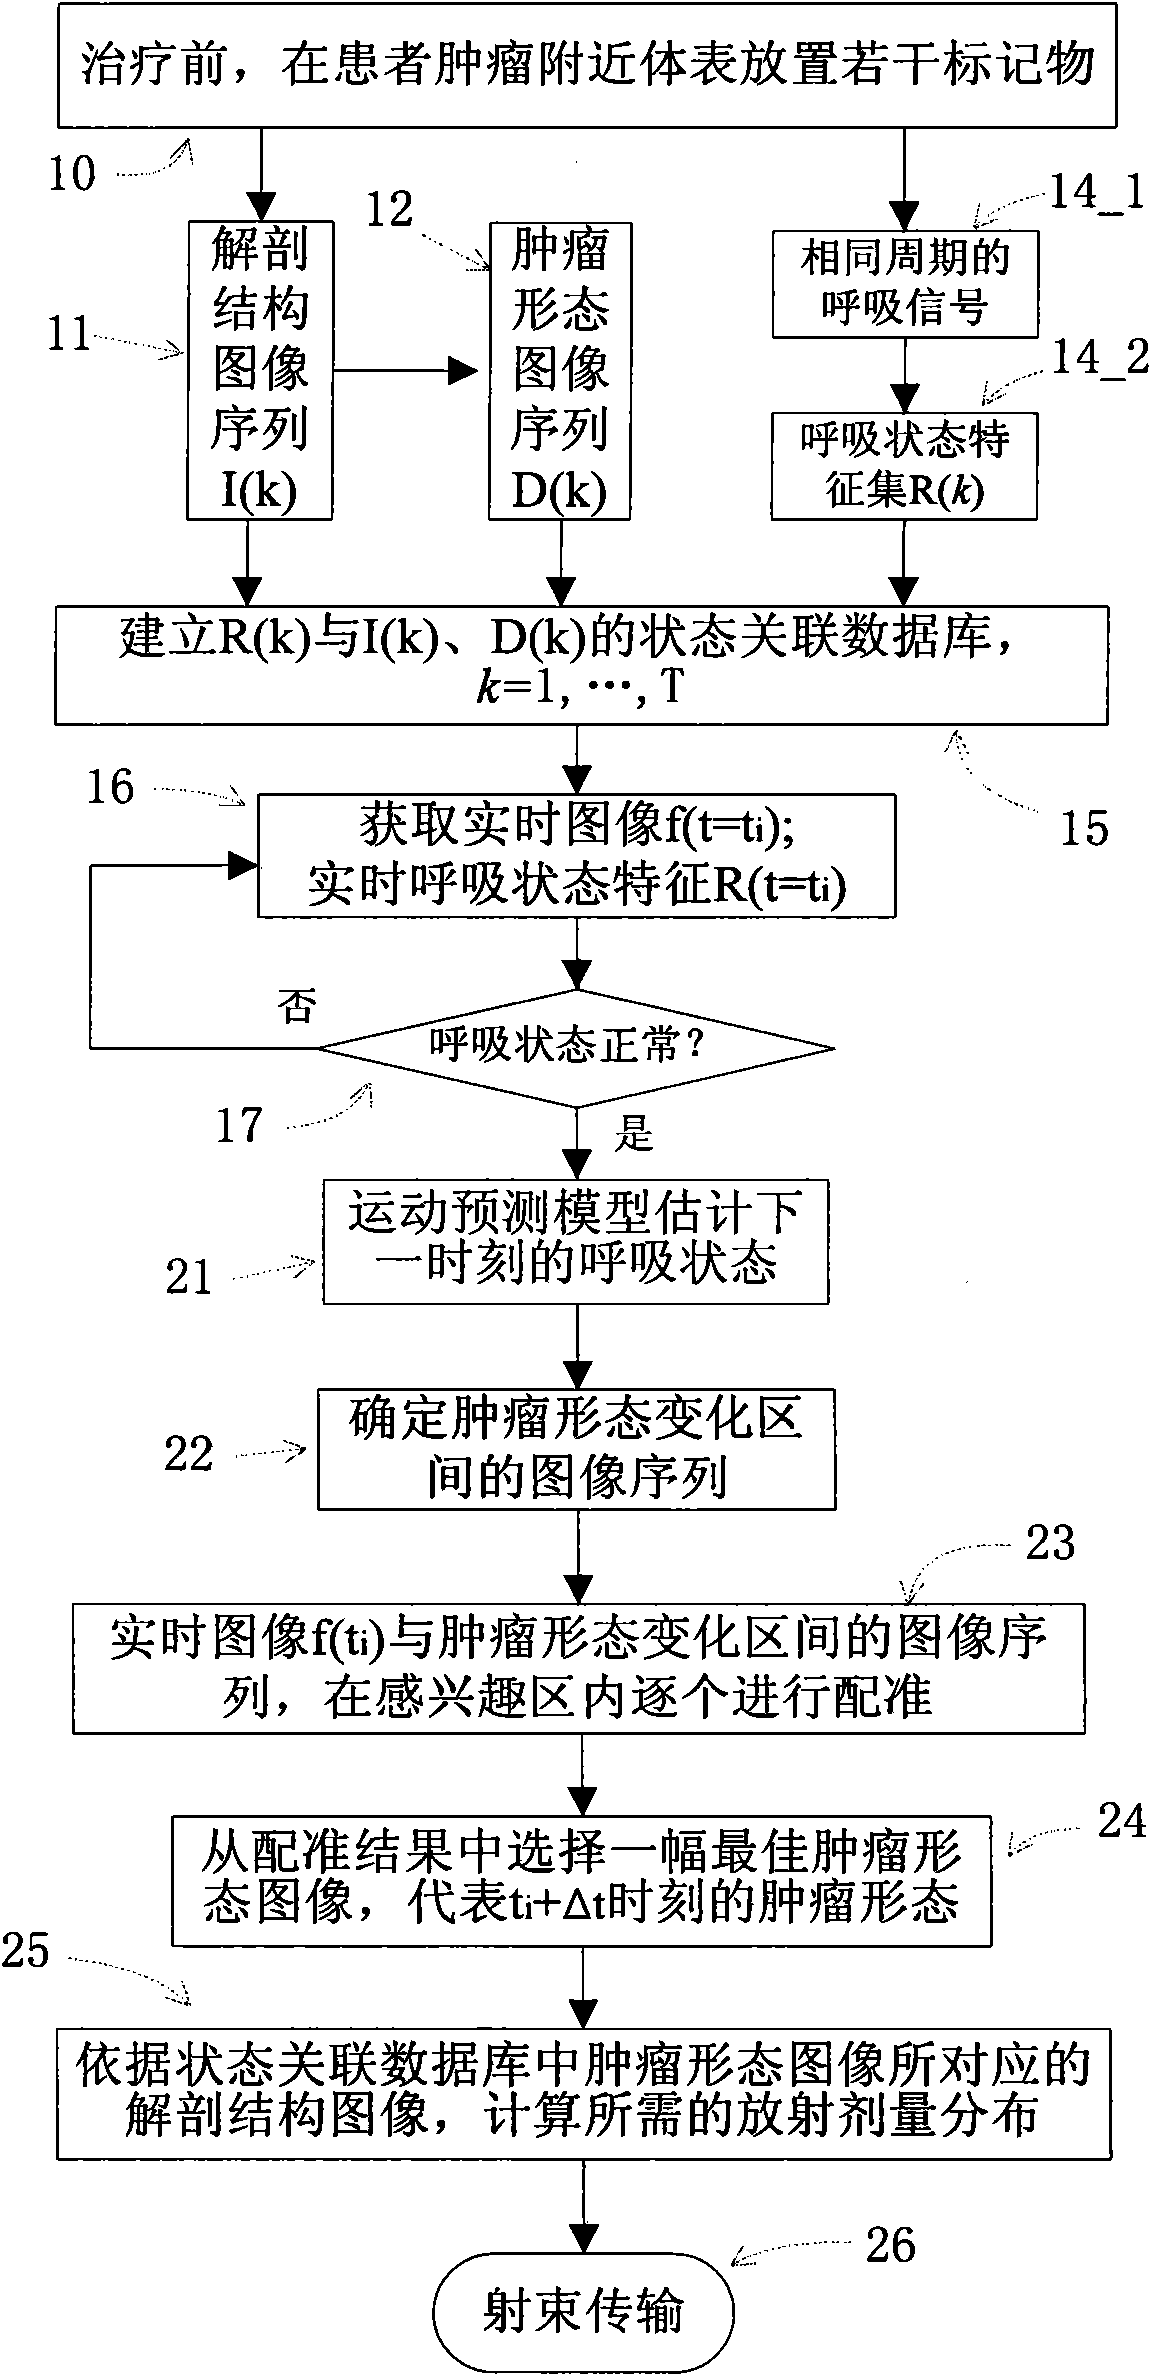 Image guiding and tracking method based on prediction